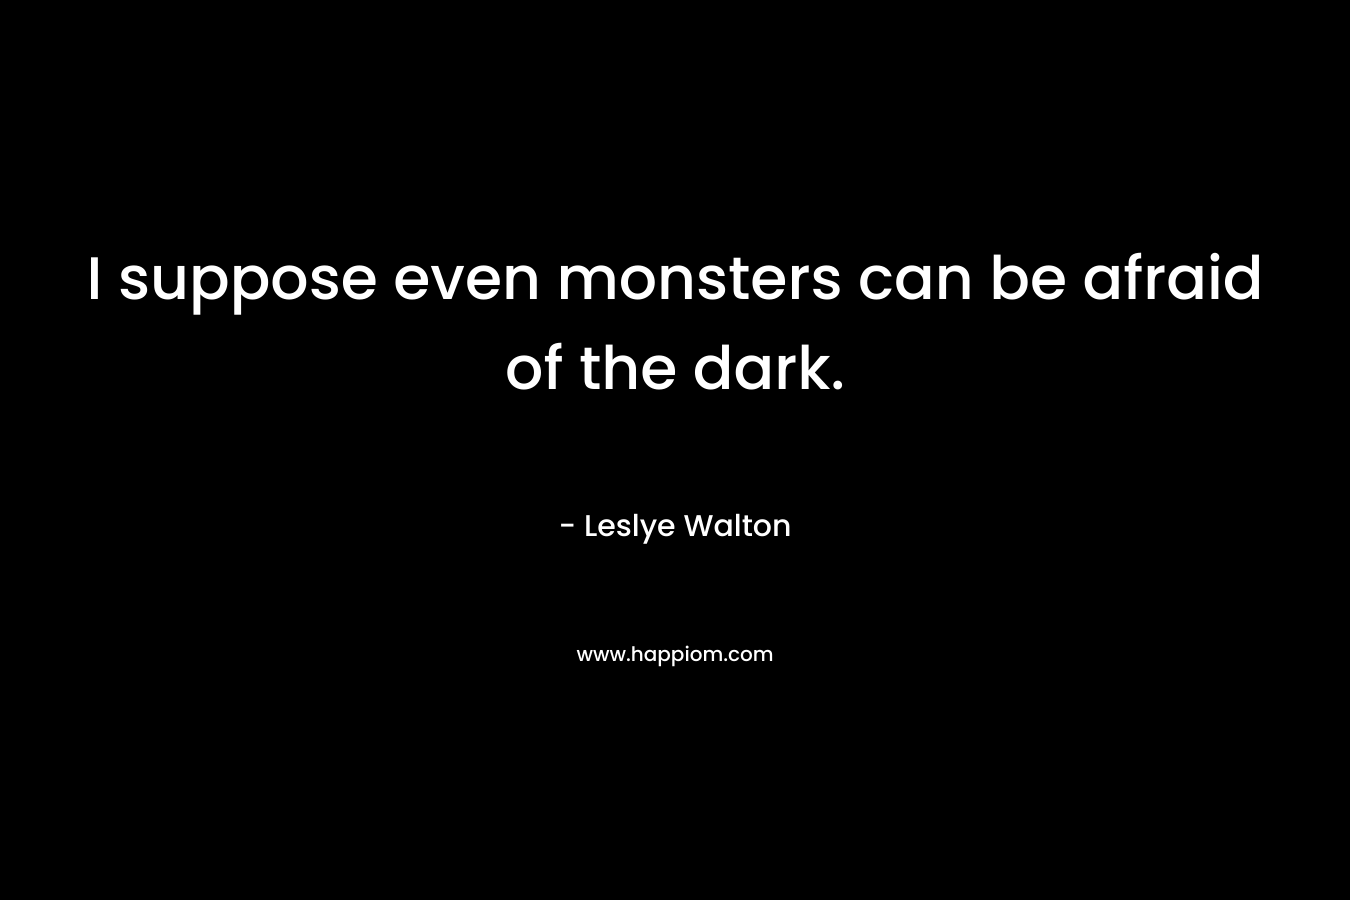 I suppose even monsters can be afraid of the dark. – Leslye Walton